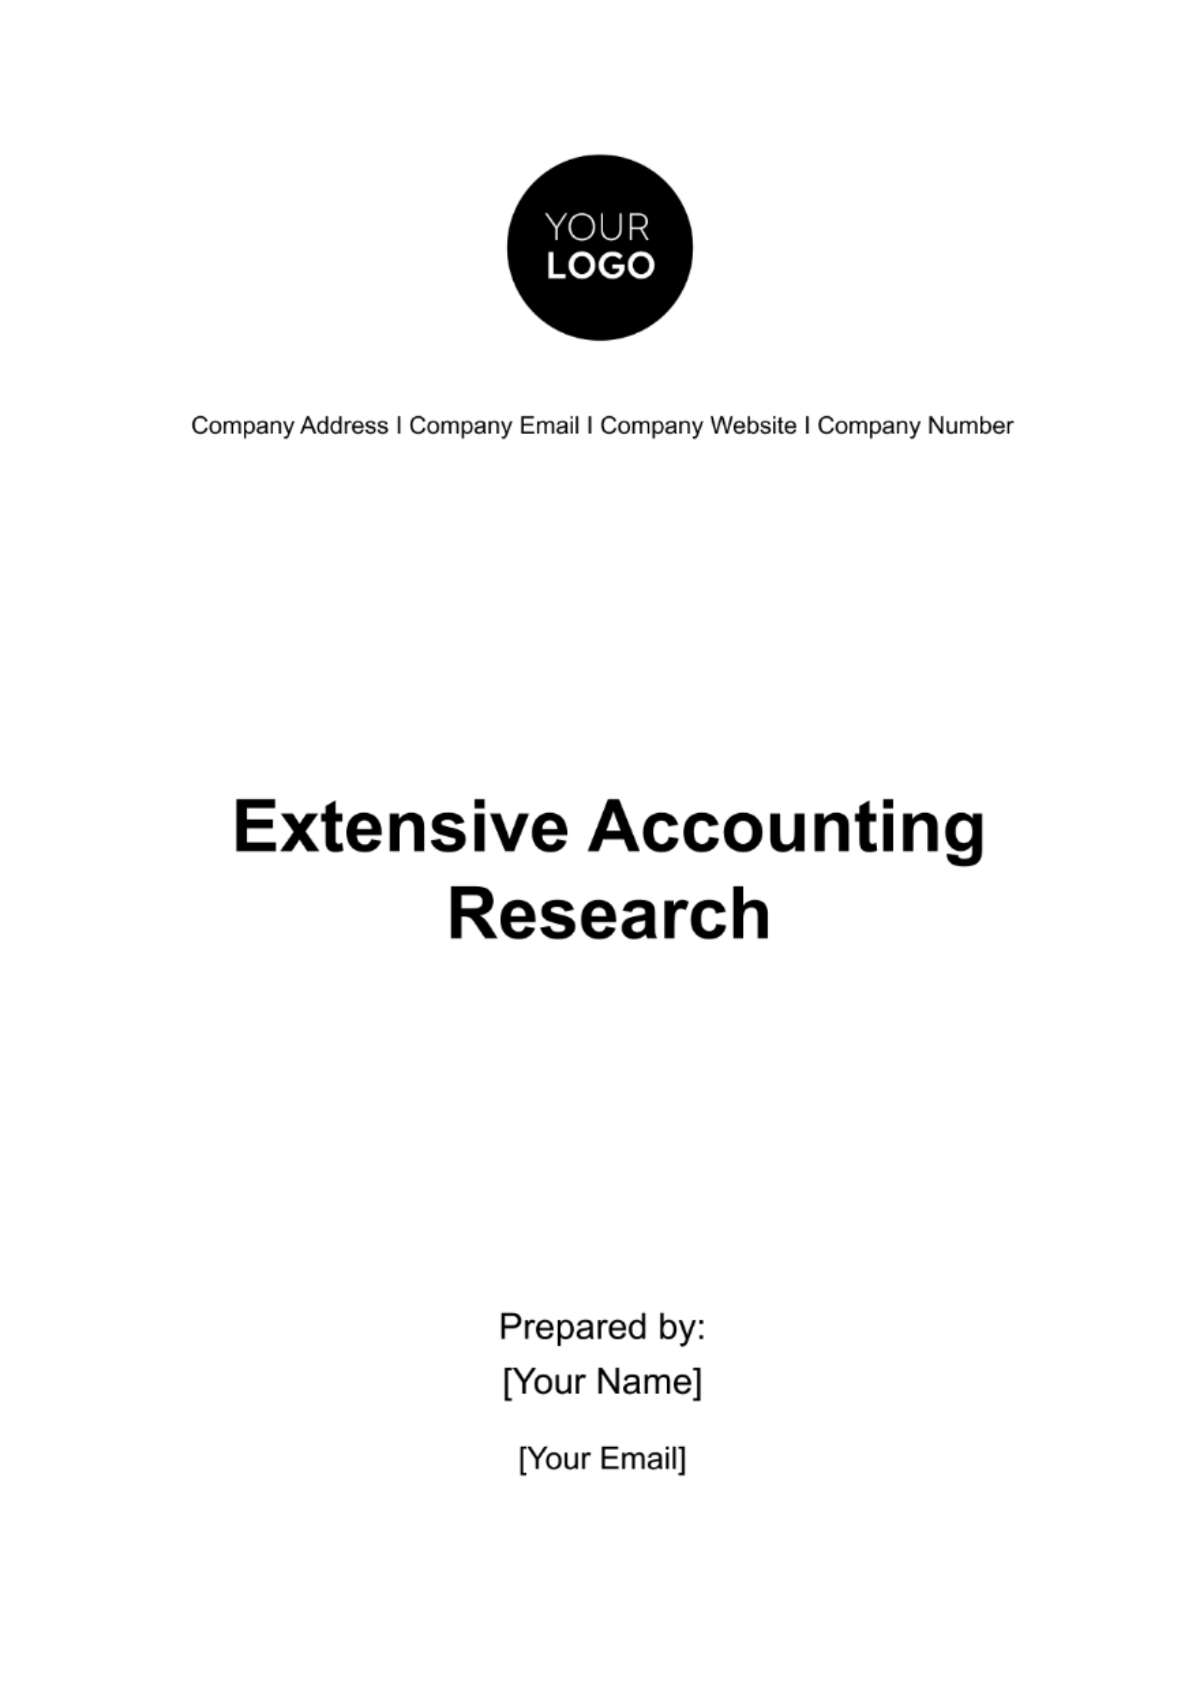 Free Extensive Accounting Research Template